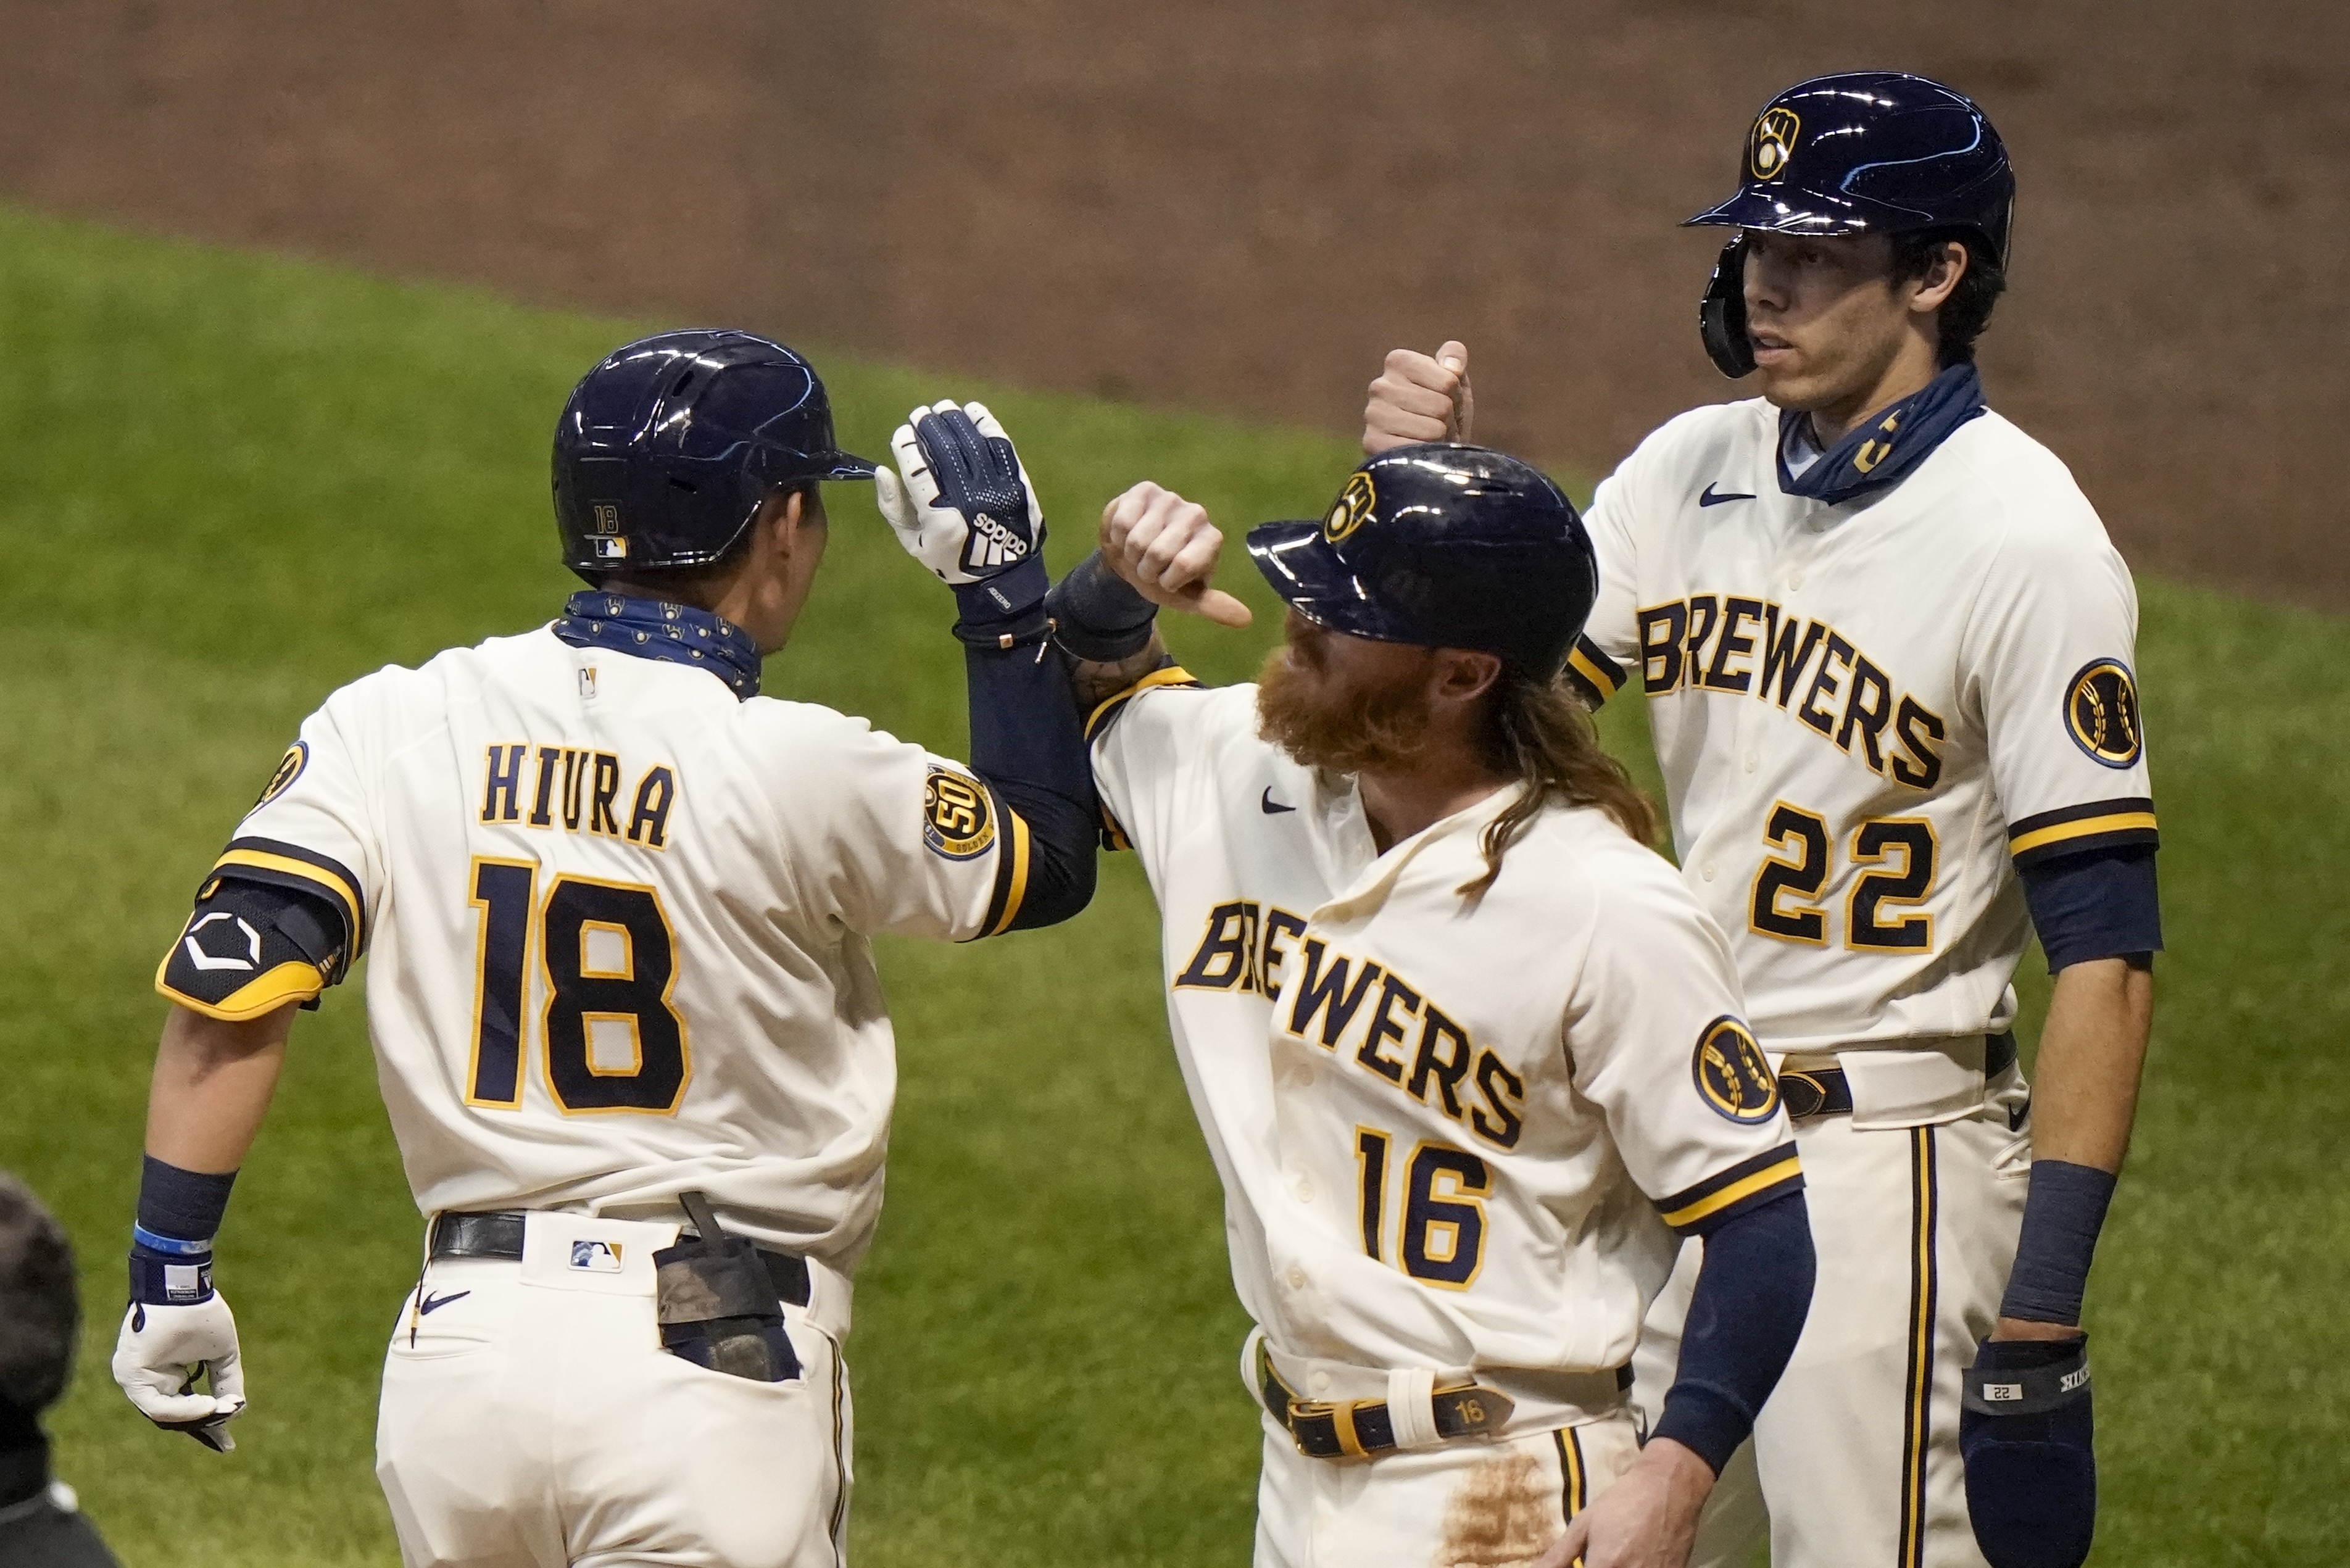 Yelich, Braun lead Brewers to 18-3 romp over Cardinals